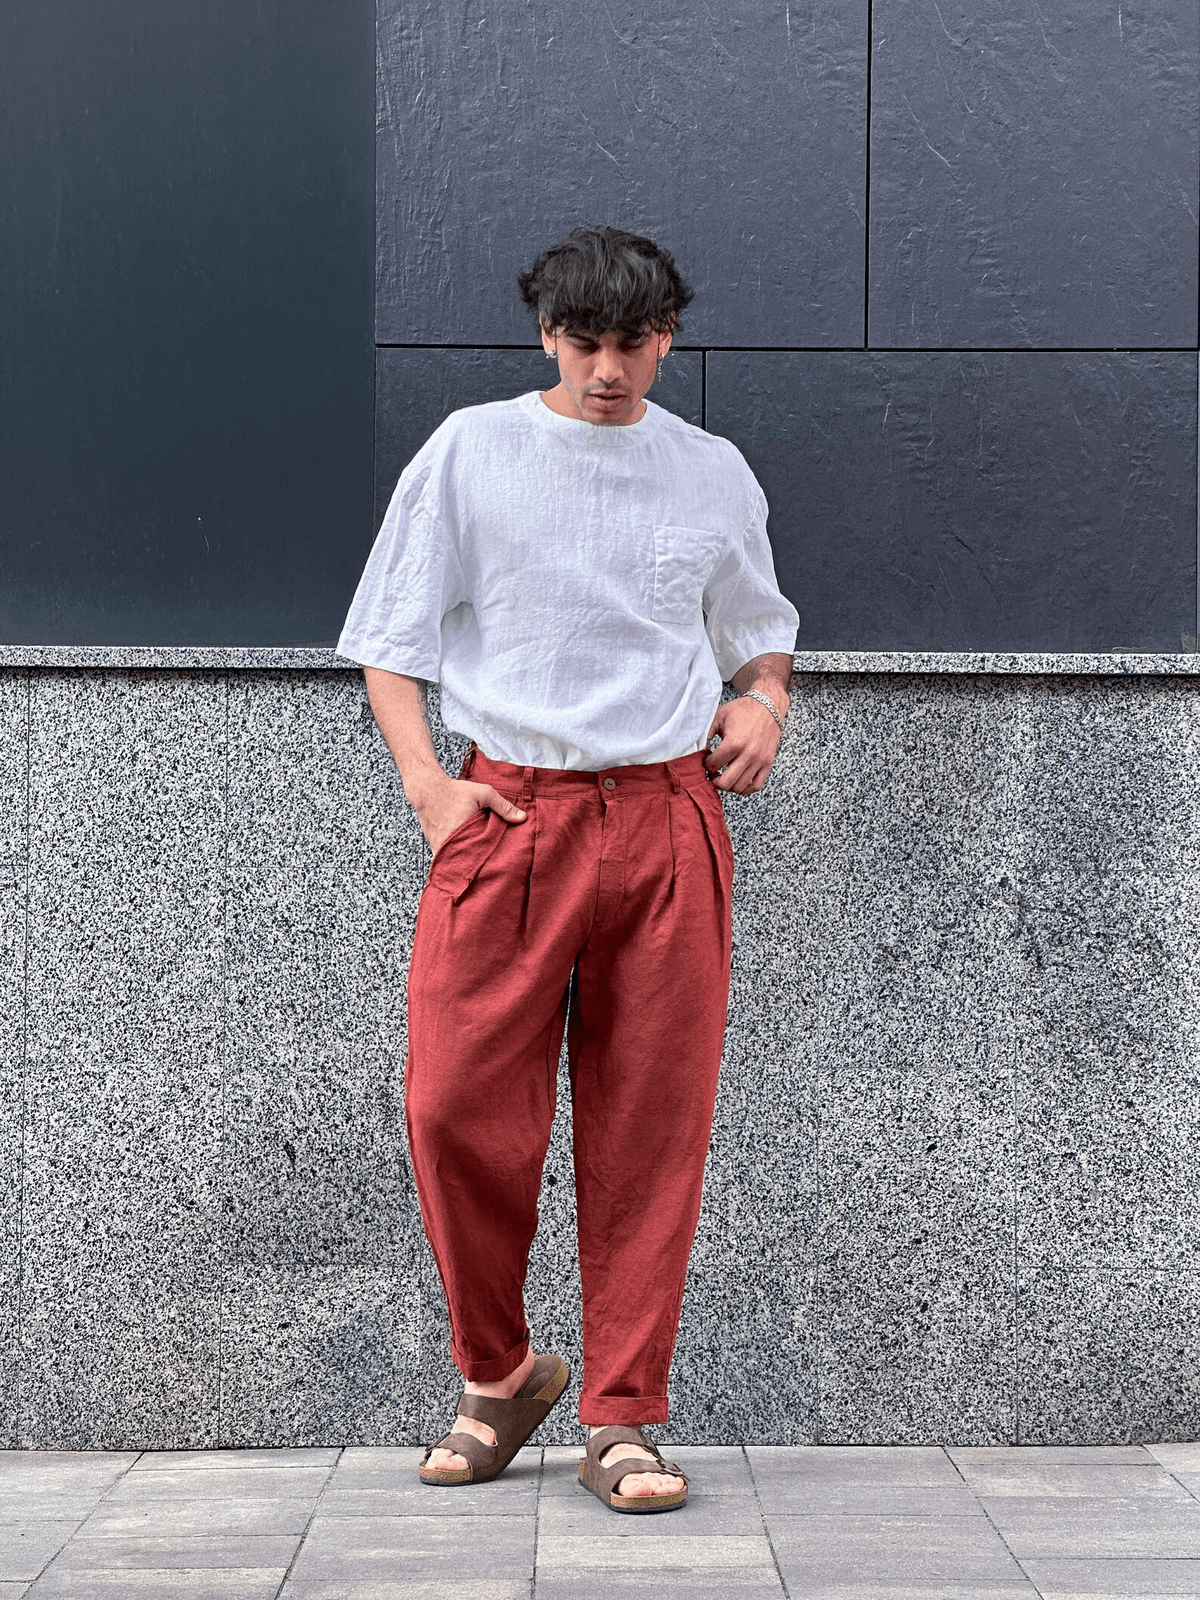 Baggy, Pleated Men's Pants Return to Fashion